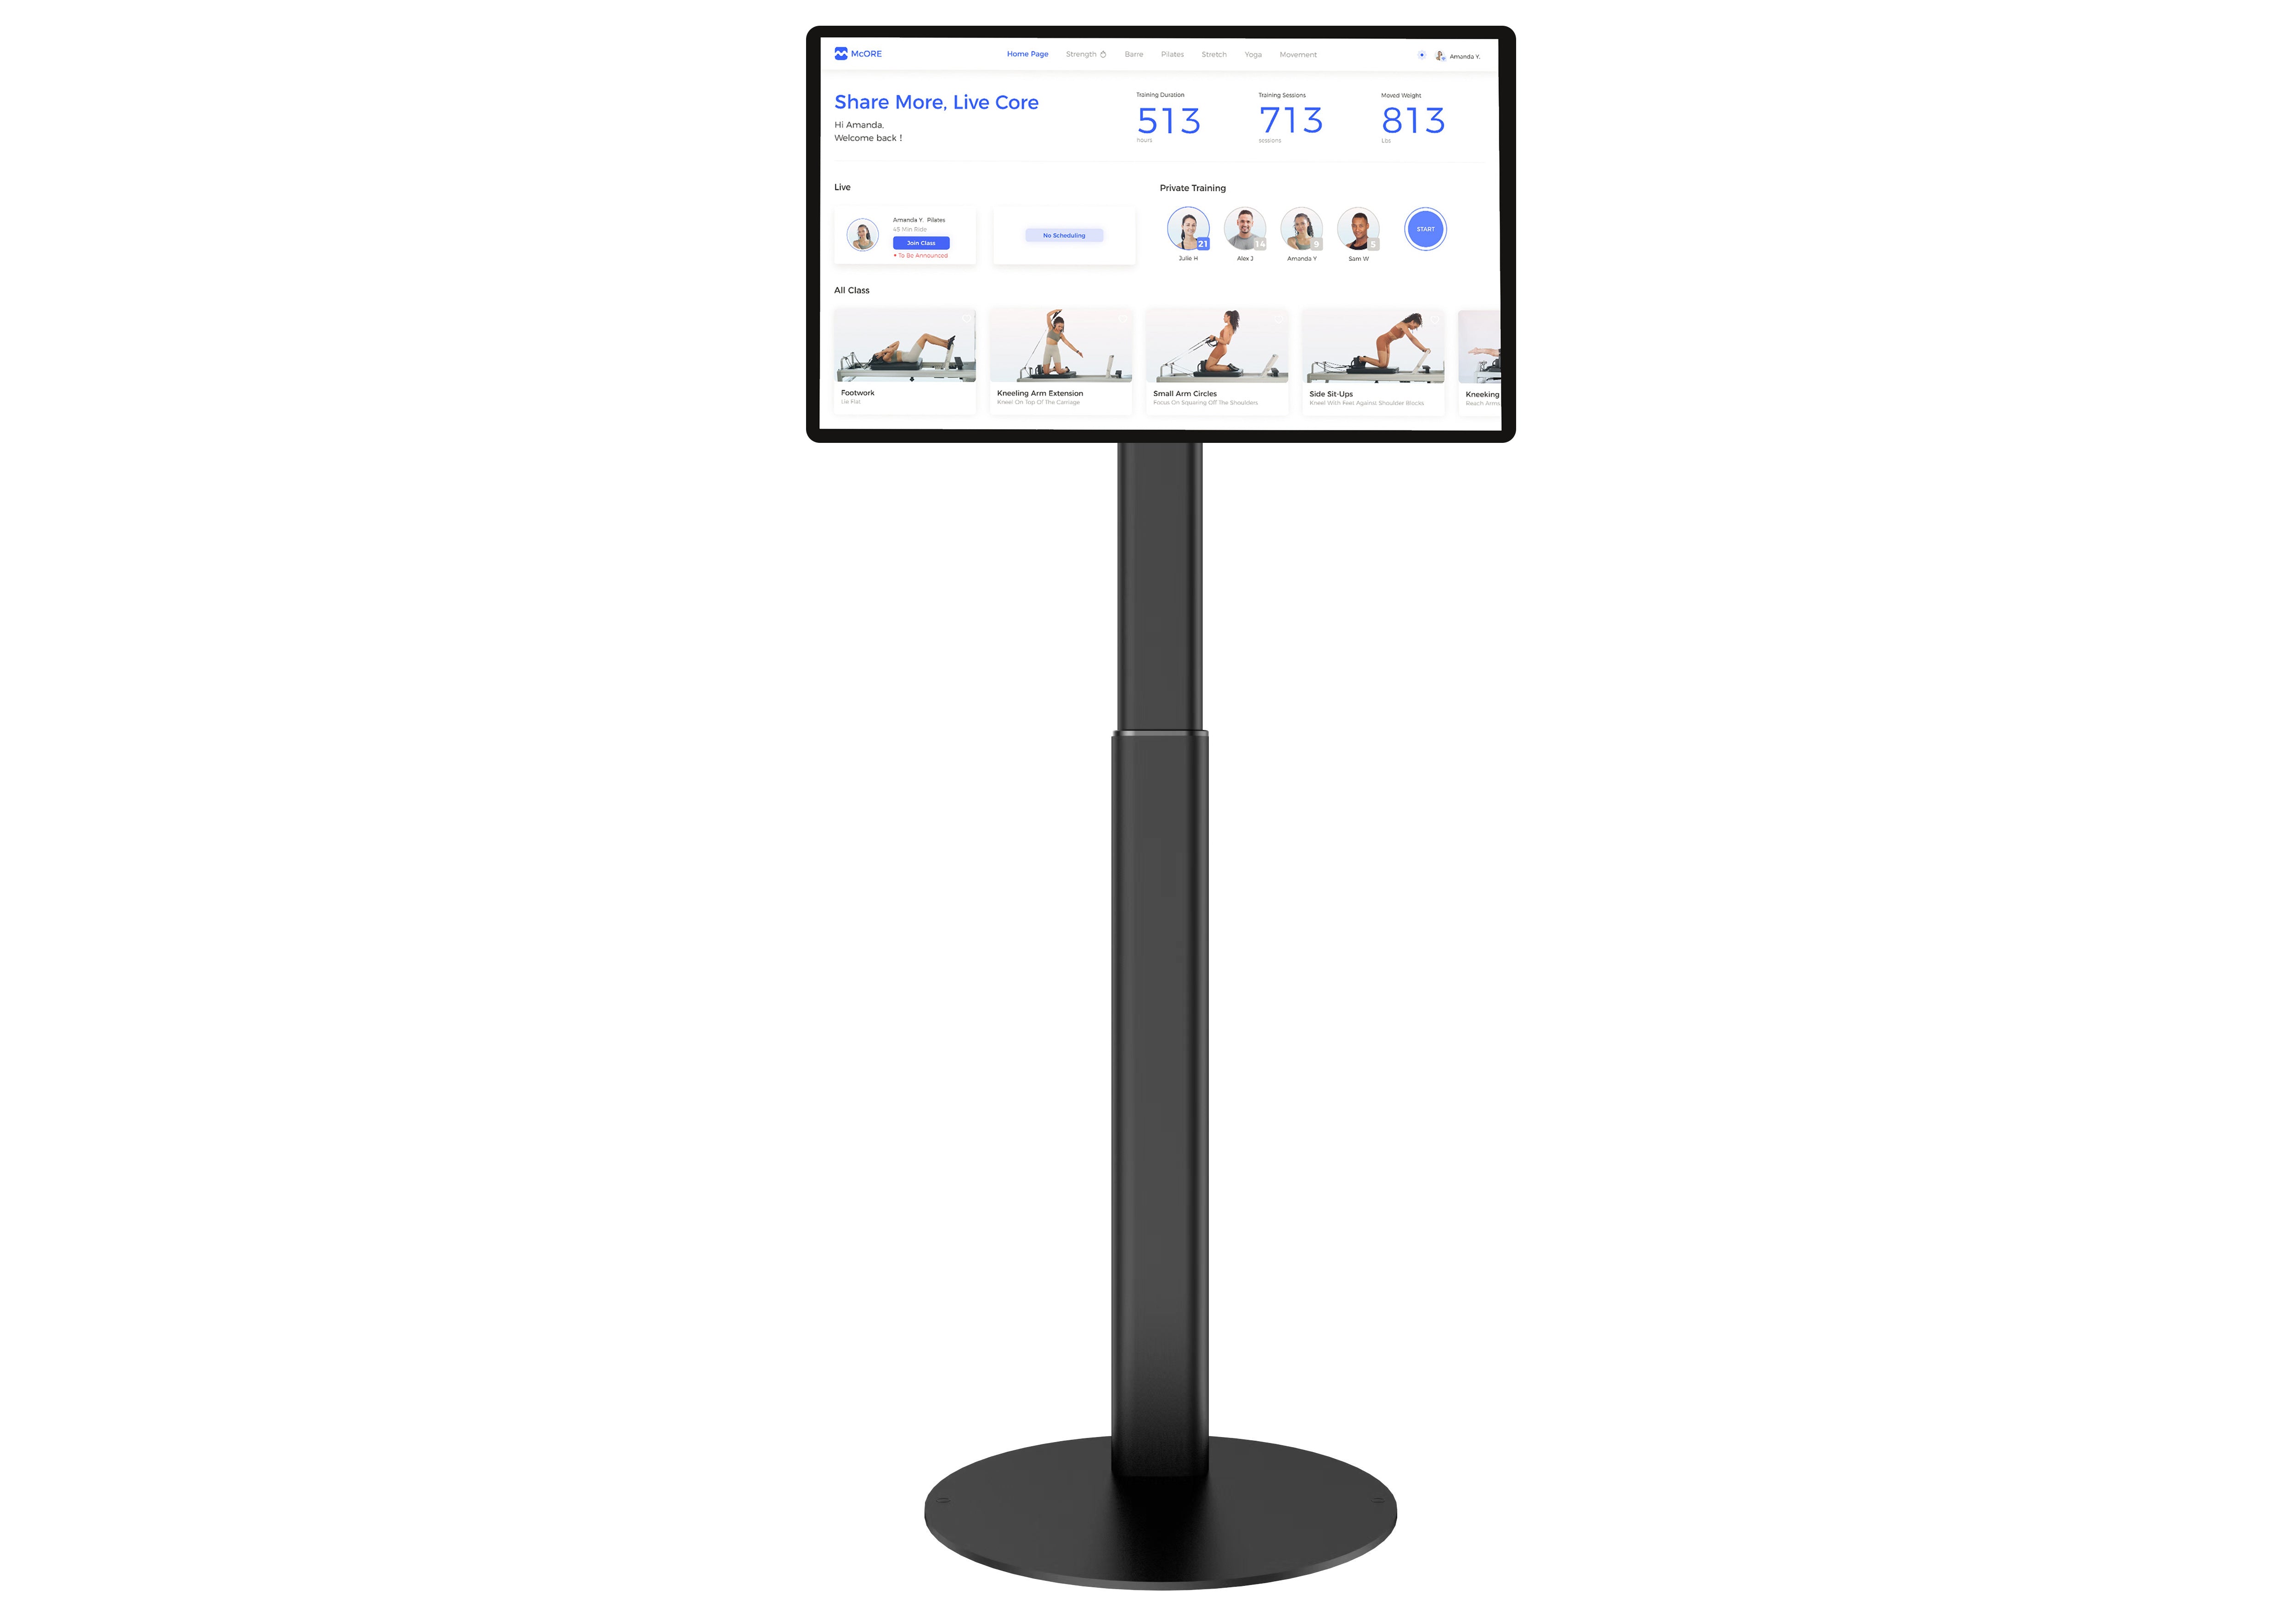 McORE 24-Inch Screen and Stand for Pilates Training